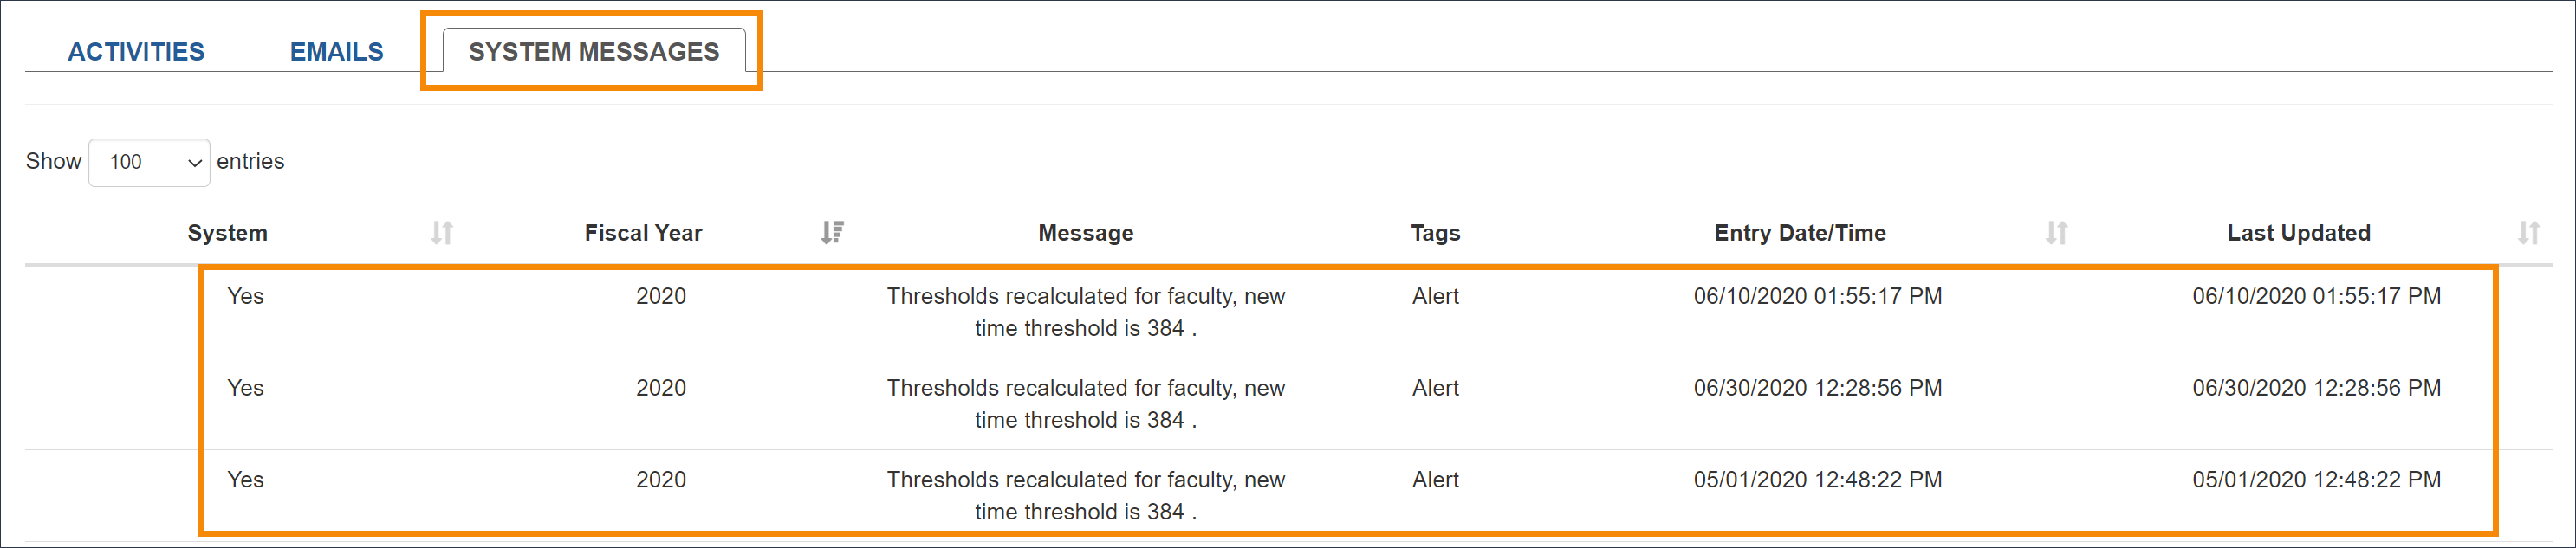 system messages tab that shows system alerts that have been generated